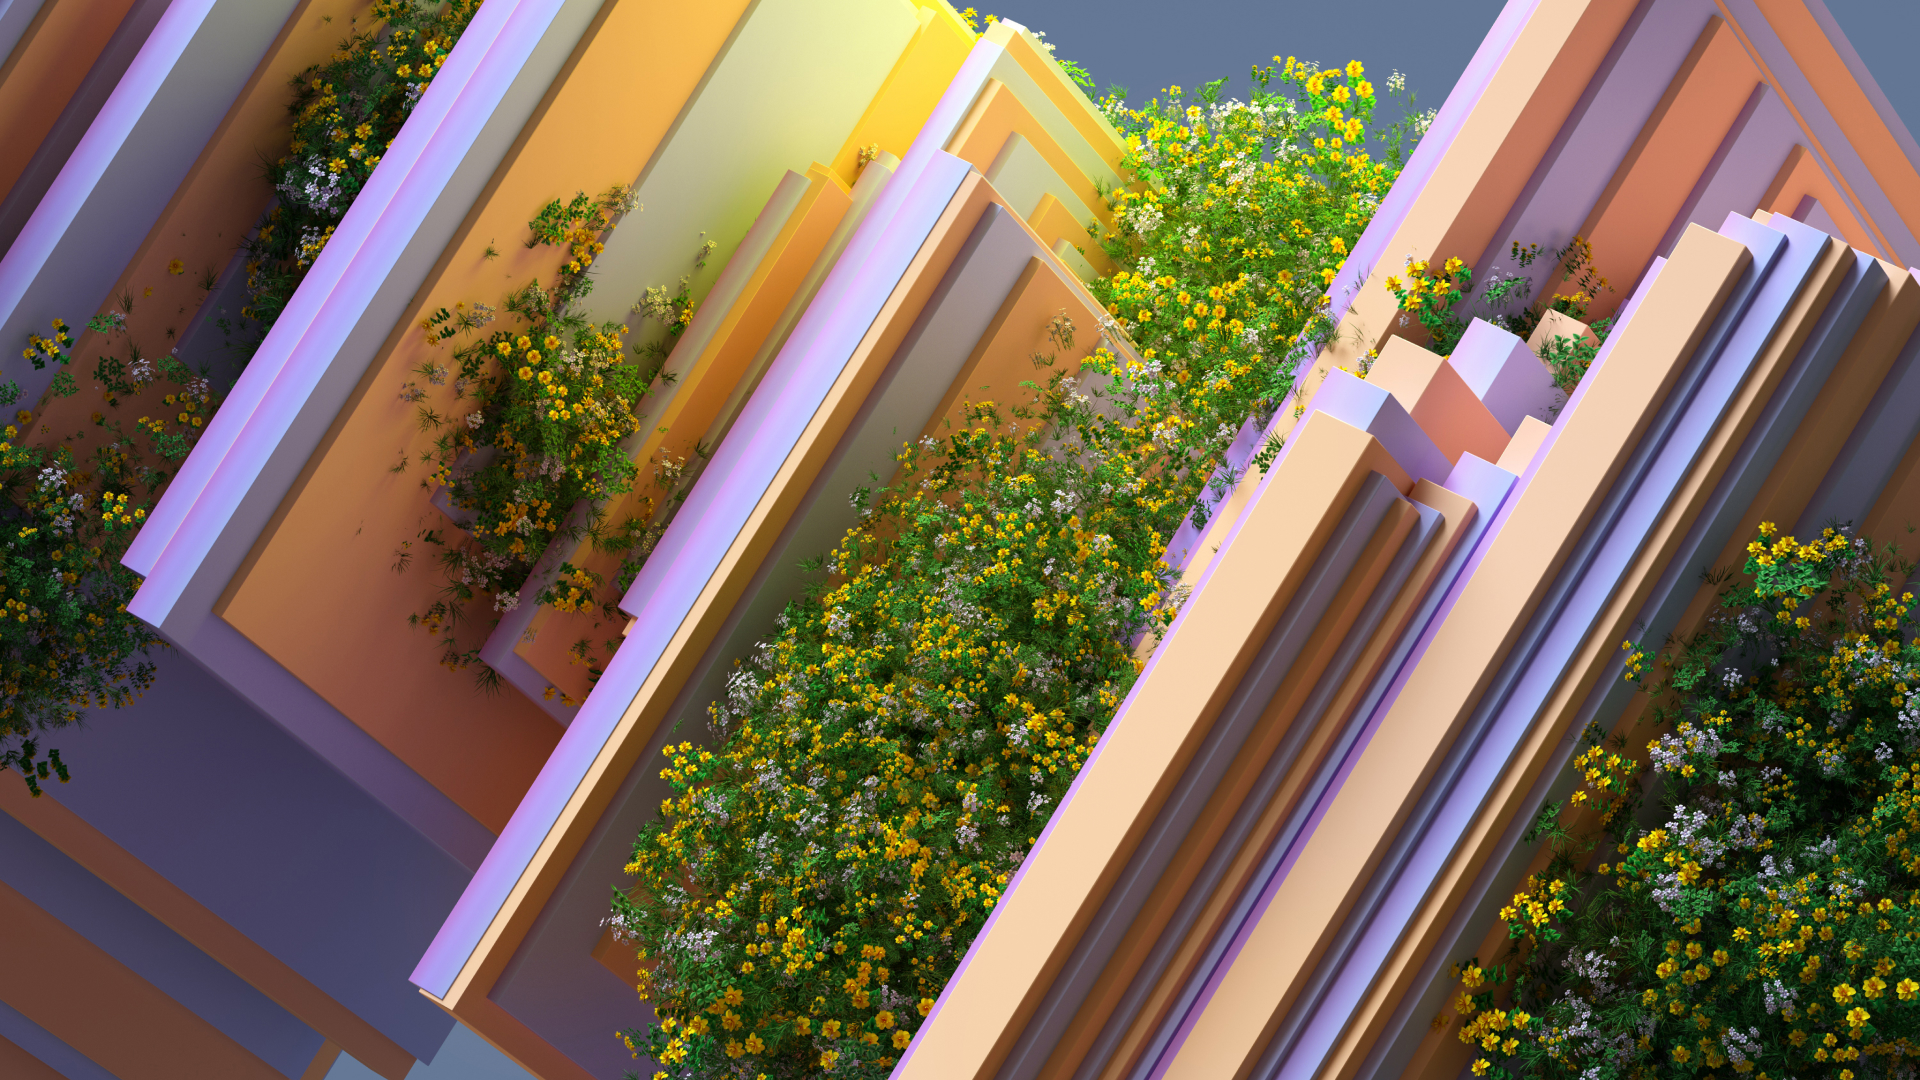 3D illustration of organic structure of square layers and plants